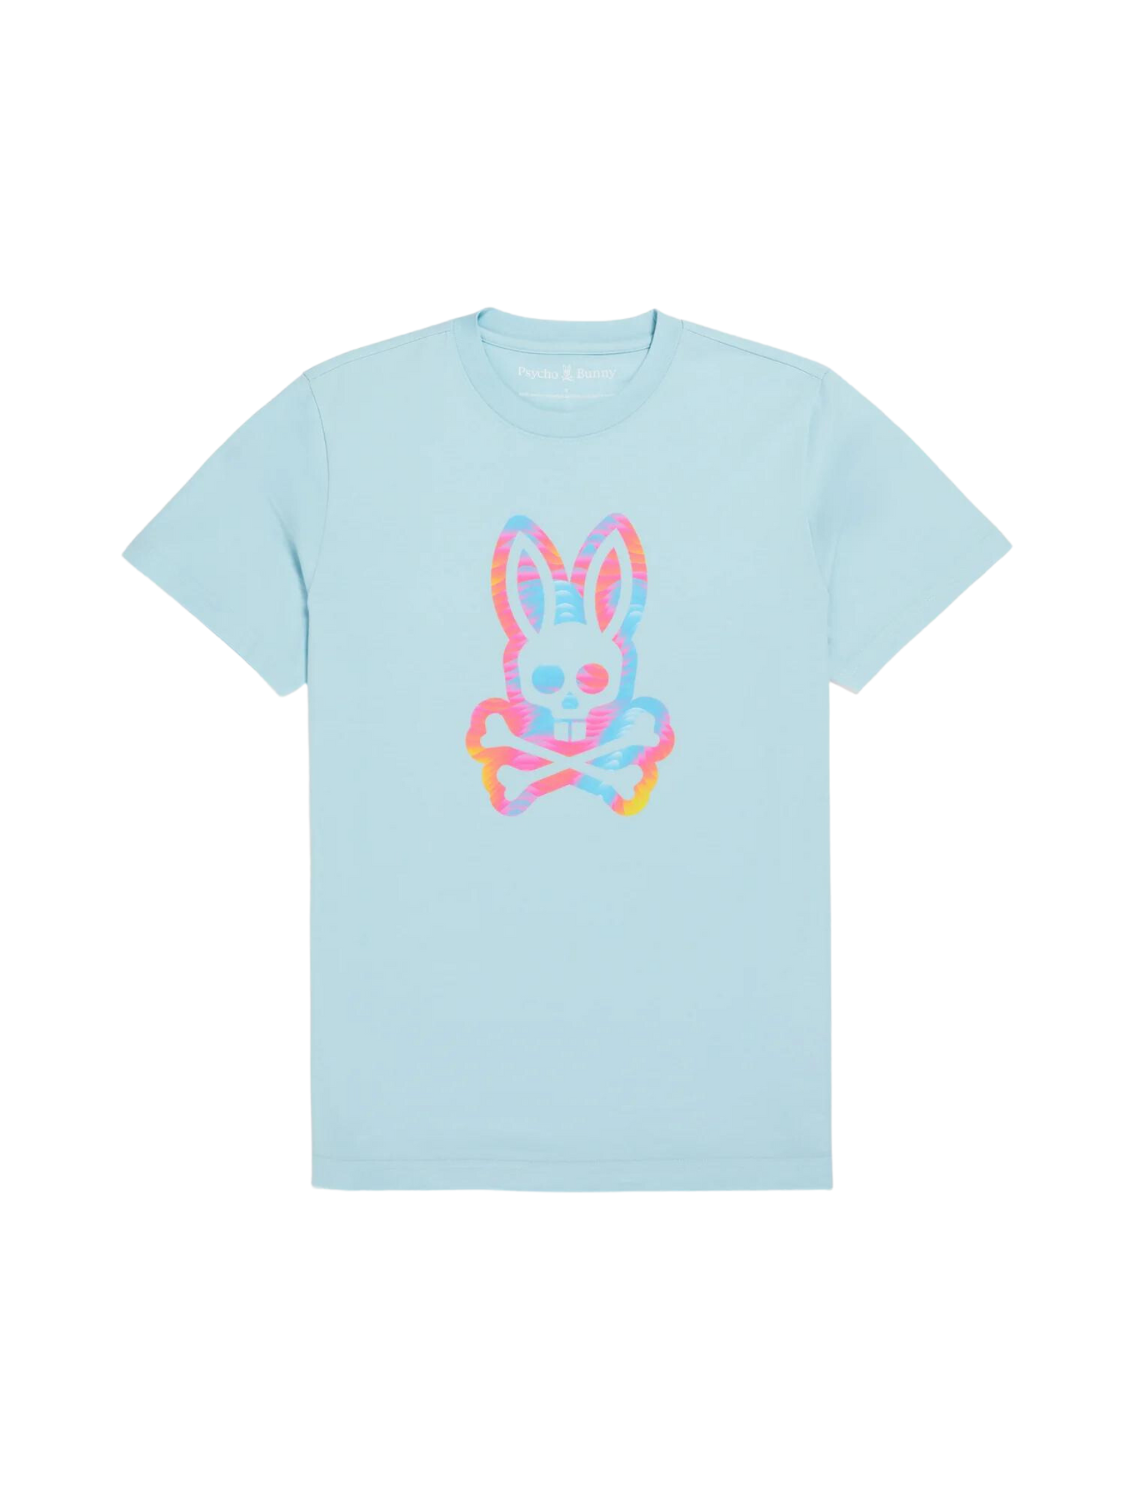 men's Montgomery graphic tee stands out with an eye-catching Bunny graphic